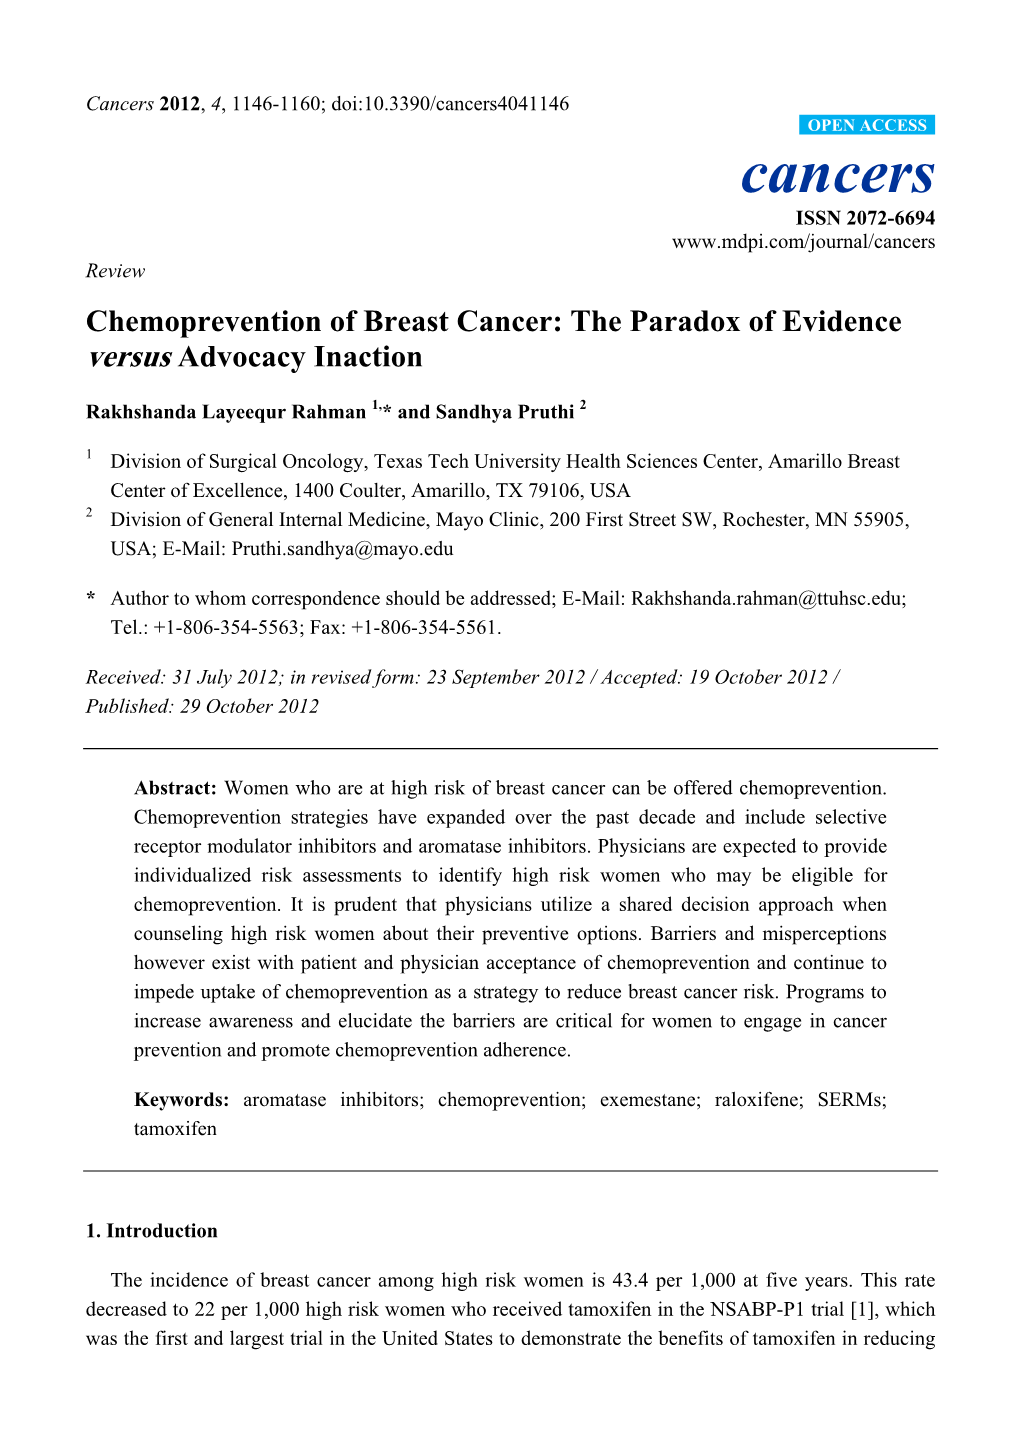 Chemoprevention of Breast Cancer: the Paradox of Evidence Versus Advocacy Inaction